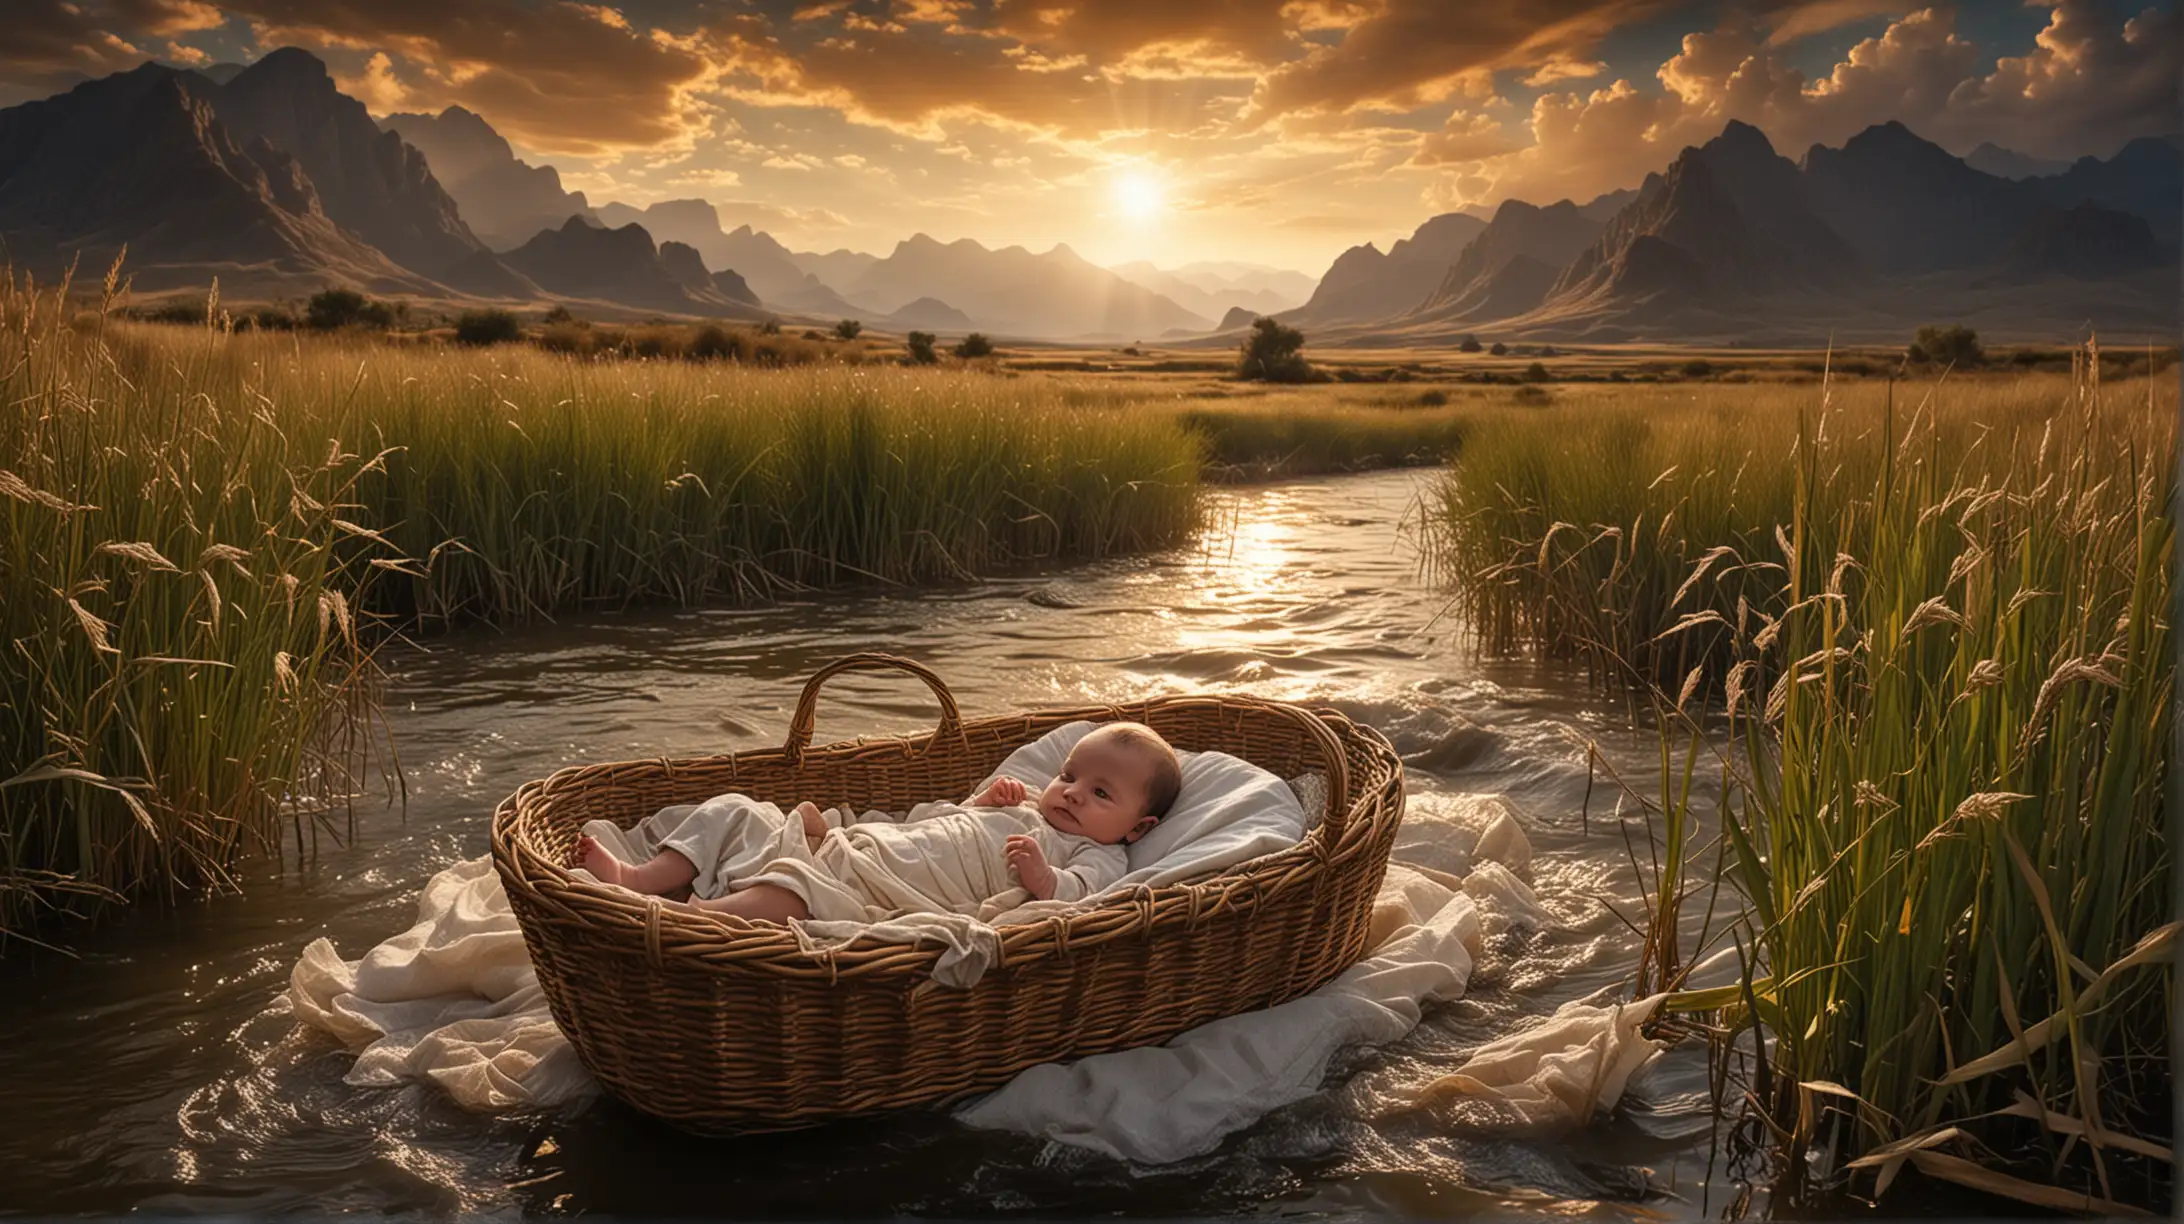 Baby in a Moses Basket by the River with Mountainous Horizon